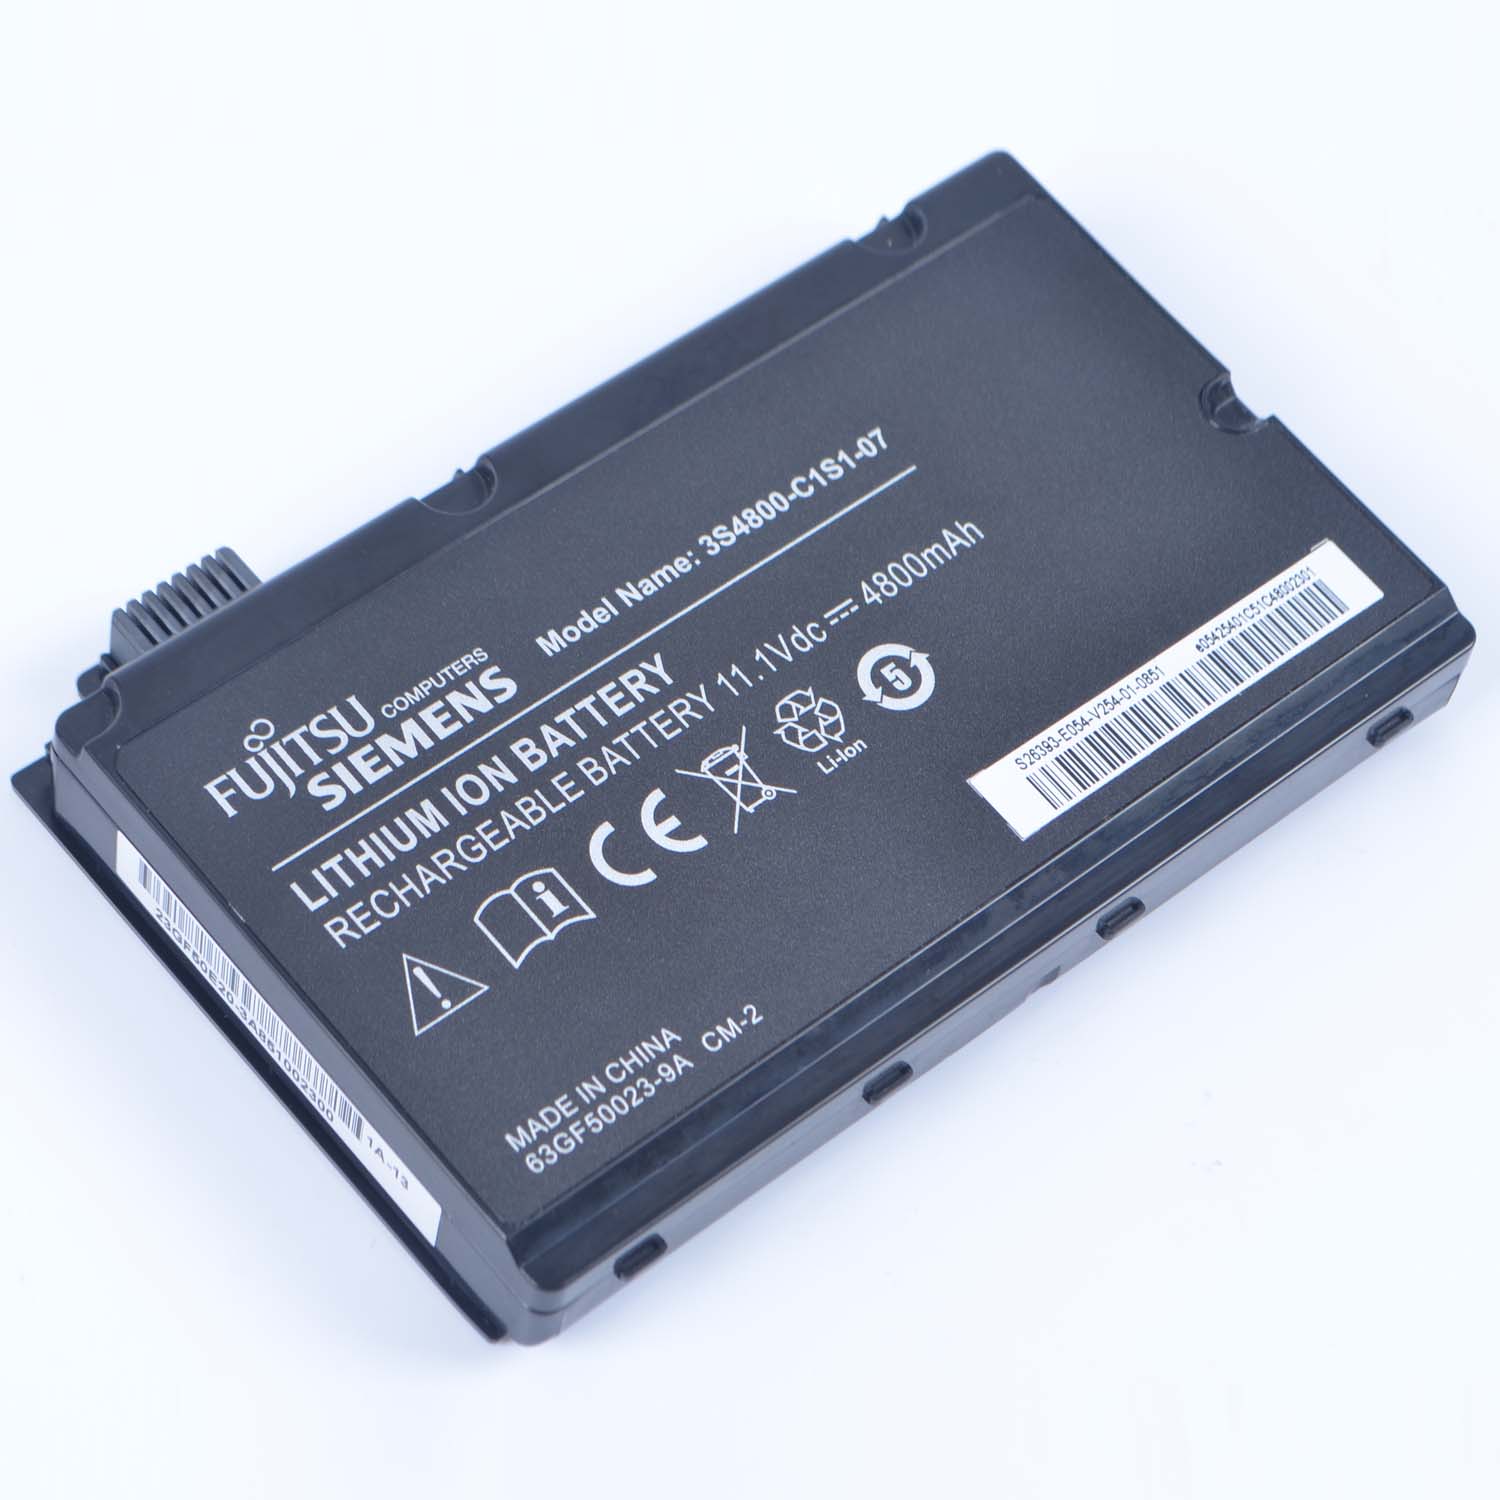 Replacement Battery for FUJITSU 3S4400-S1S5-07 battery